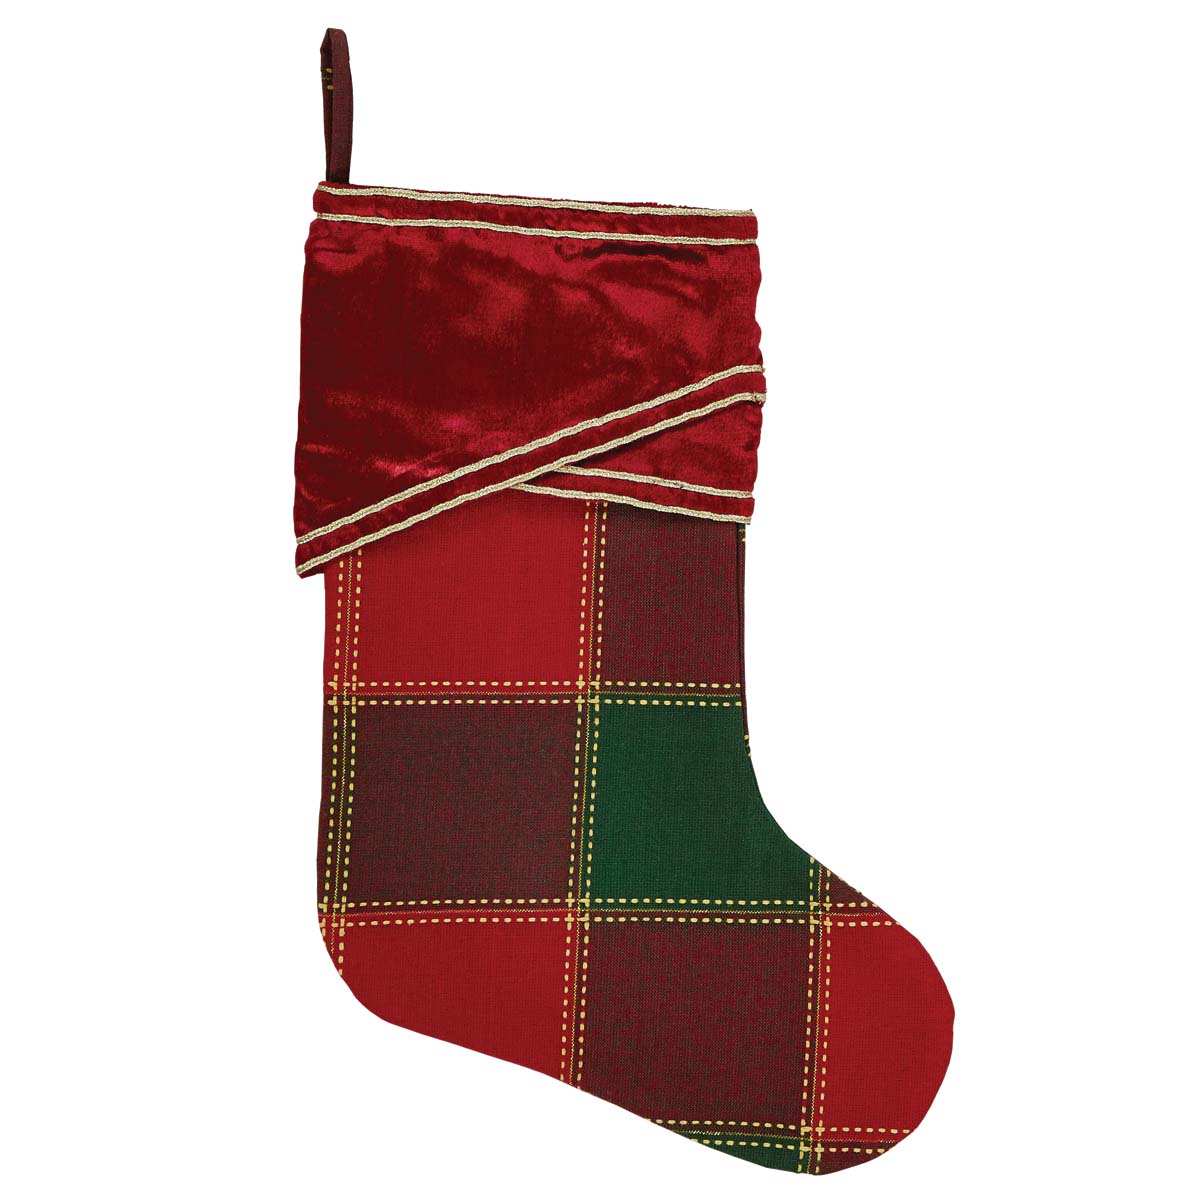 Seasons Crest Tristan Stocking 11x15 By VHC Brands